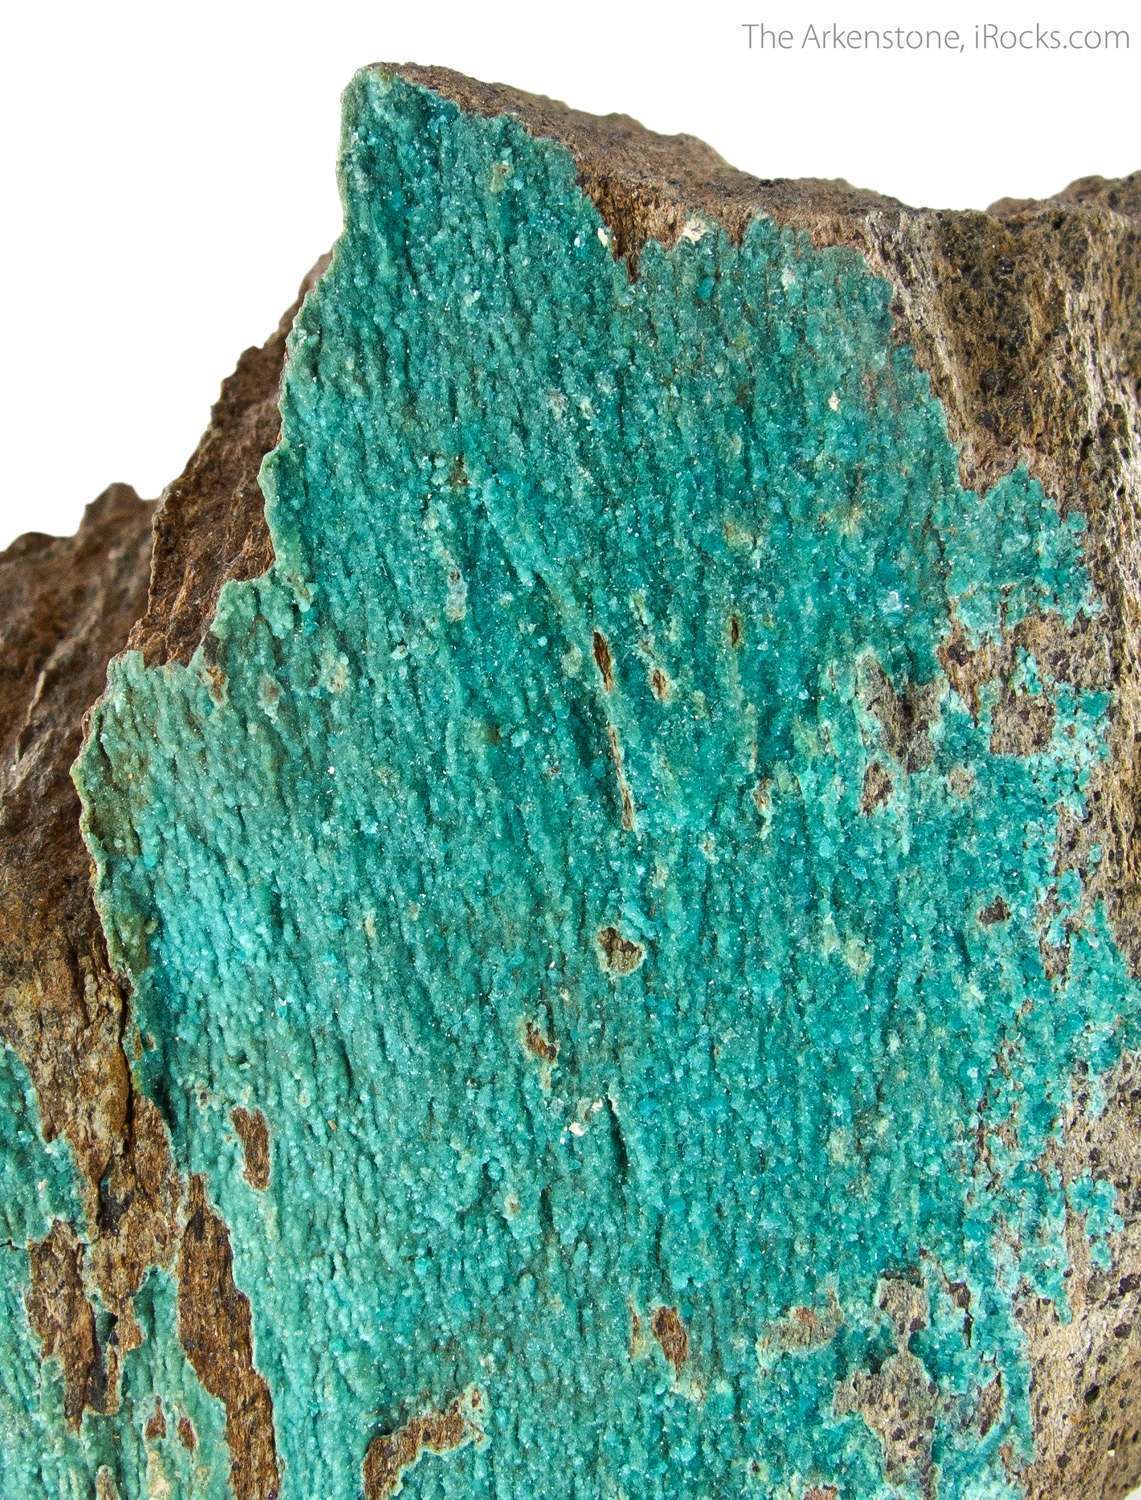 RARE COLORADO TURQUOISE Crystal Crystals From: extinct mine Turquoise Chief Mine aka Josie May Collectors item Colorado Leadville